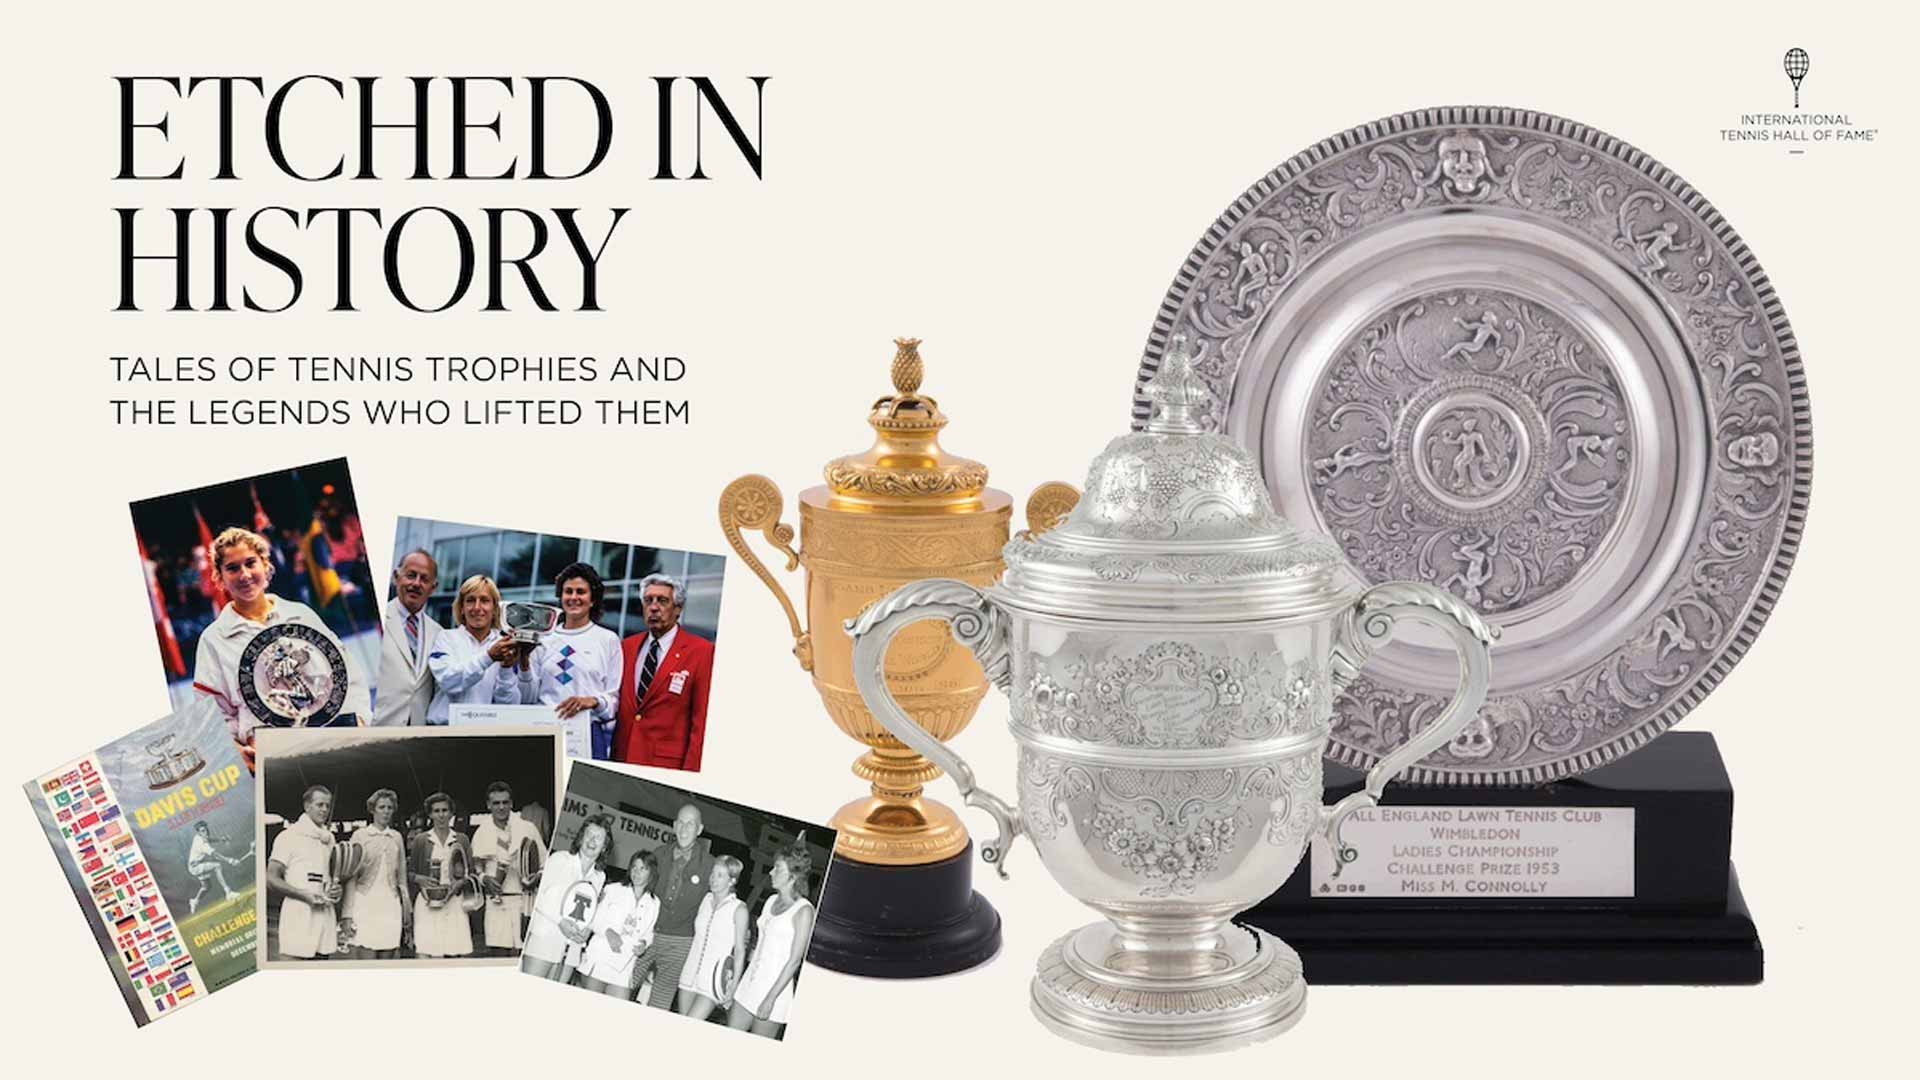 Fans can now view 'Etched In History' online.